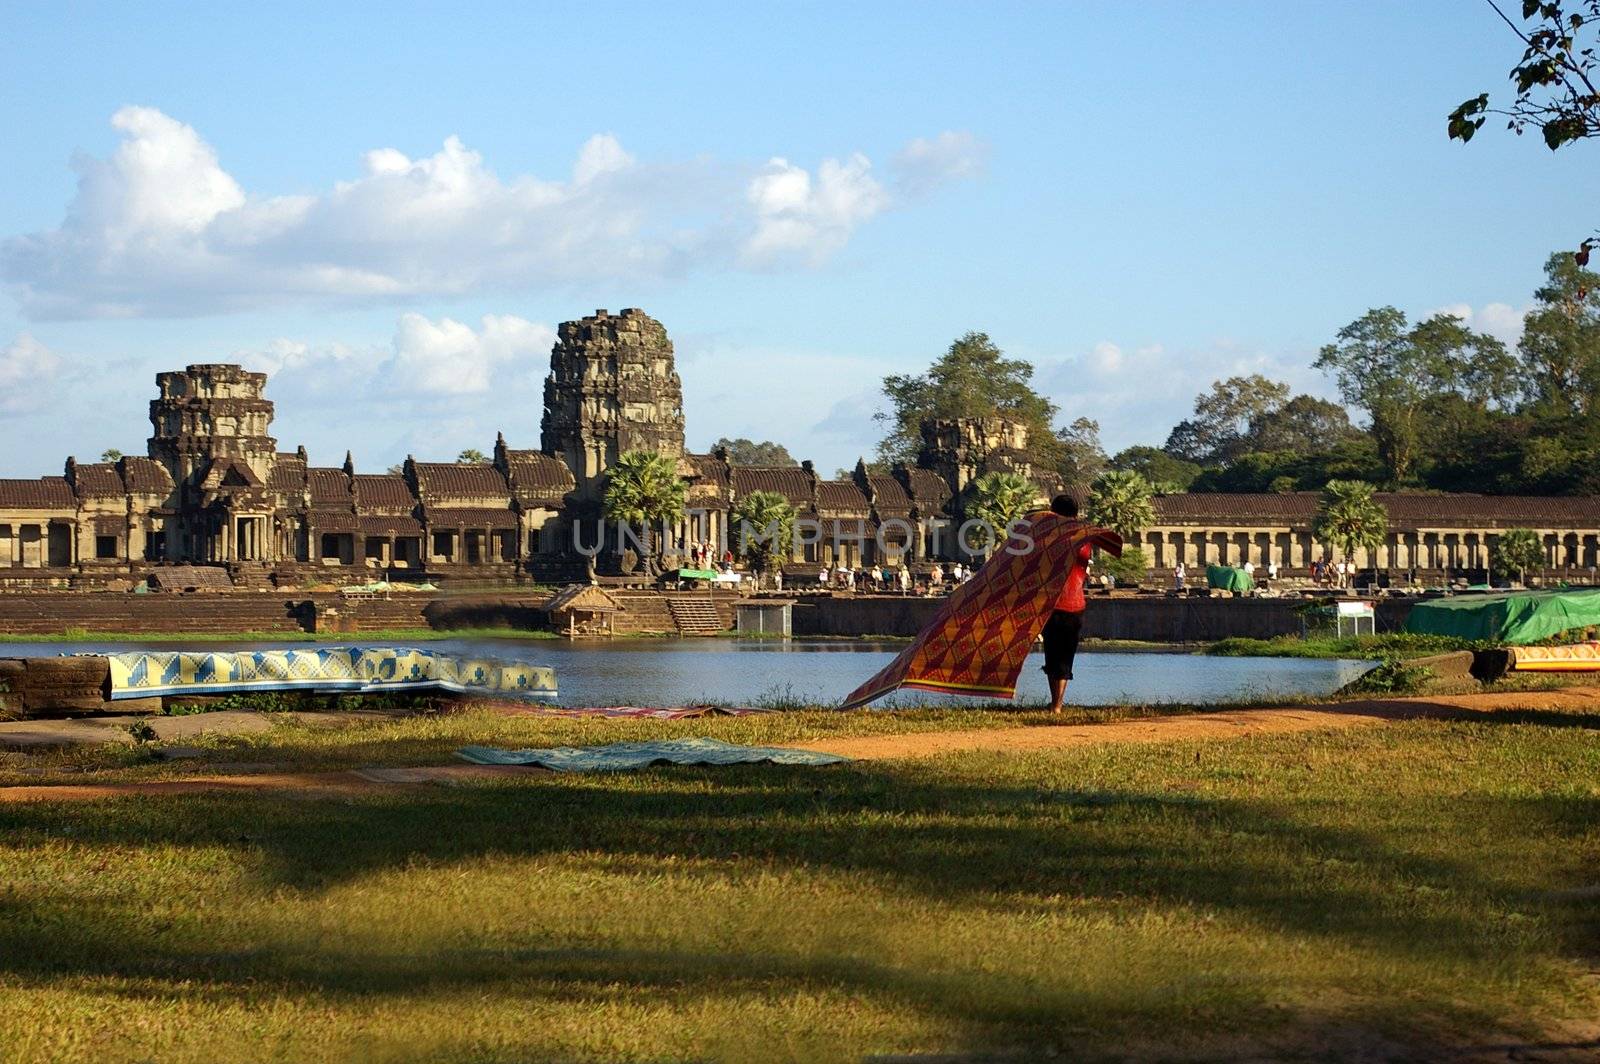 Scenic view of Angkor Wat temple, Siem Reap, Cambodia.